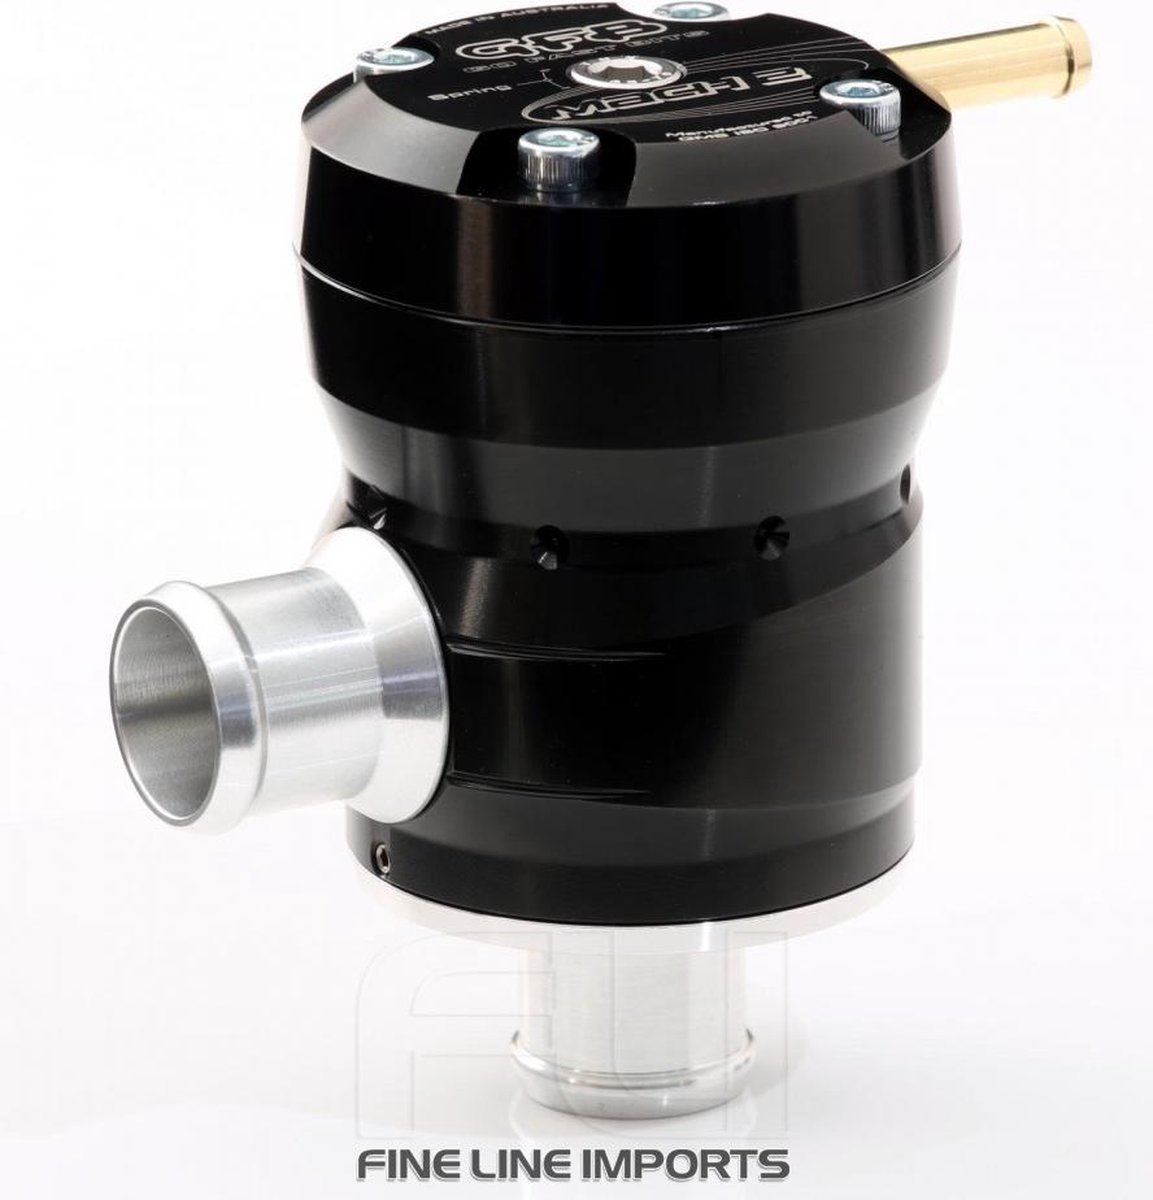 GFB Mach 2 TMS Recirculating Diverter valve (25mm inlet, 25mm outlet)